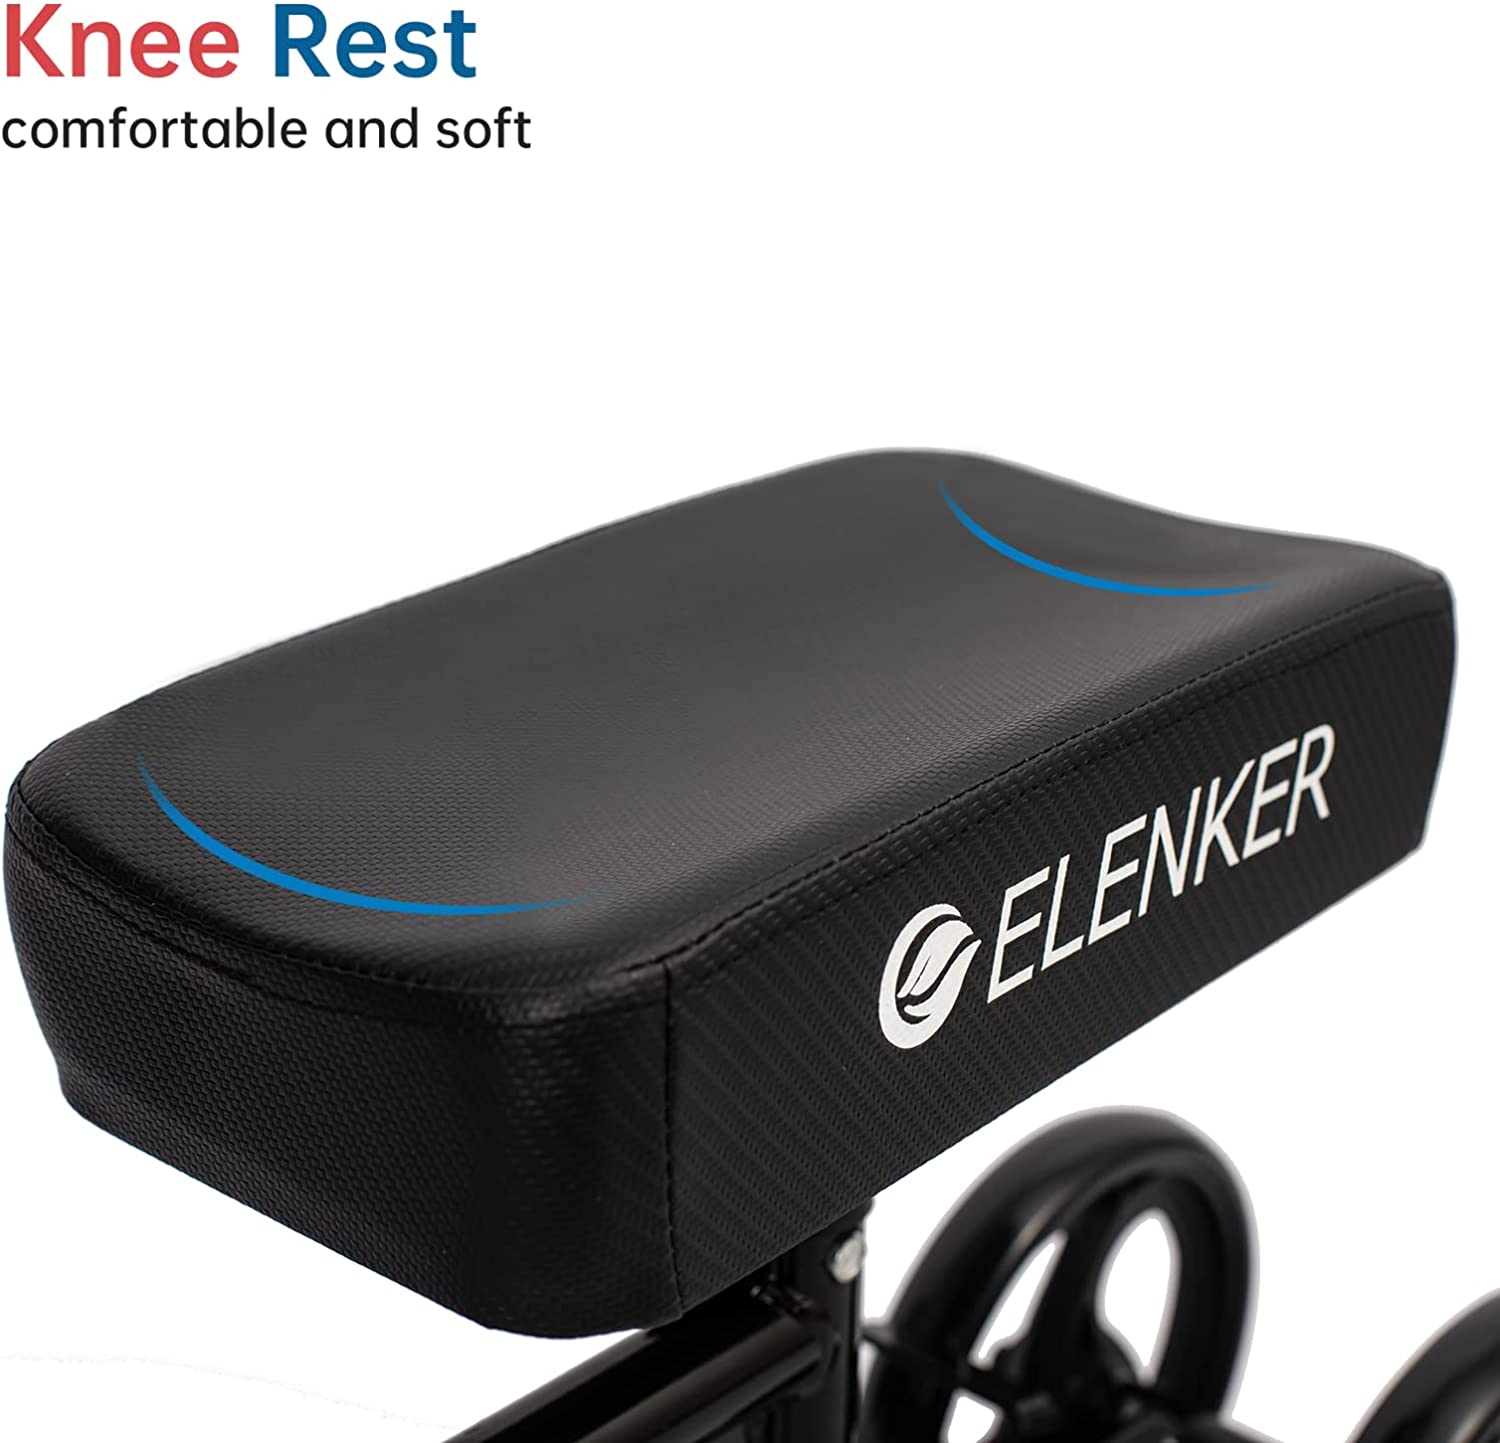 KGH-9161A  ELENKER?  Steerable Knee Walker Deluxe Medical Scooter for Foot Injuries Compact Crutches Alternative Black